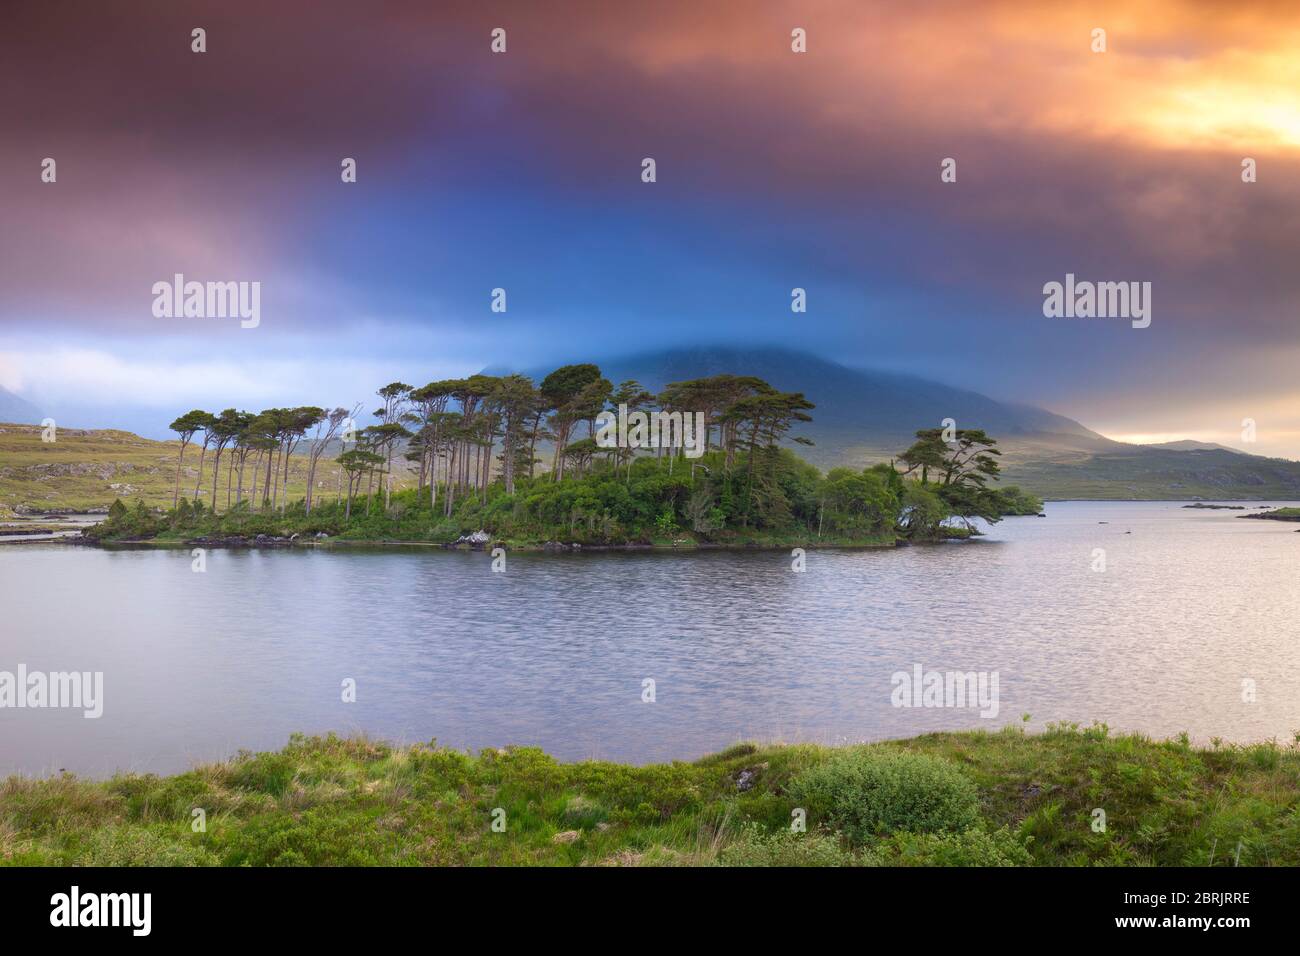 View of Pine Island on the Derryclare Lough. Pine Island, Connemara National Park, County Galway, Connacht province, Inagh Valley, Ireland. Stock Photo